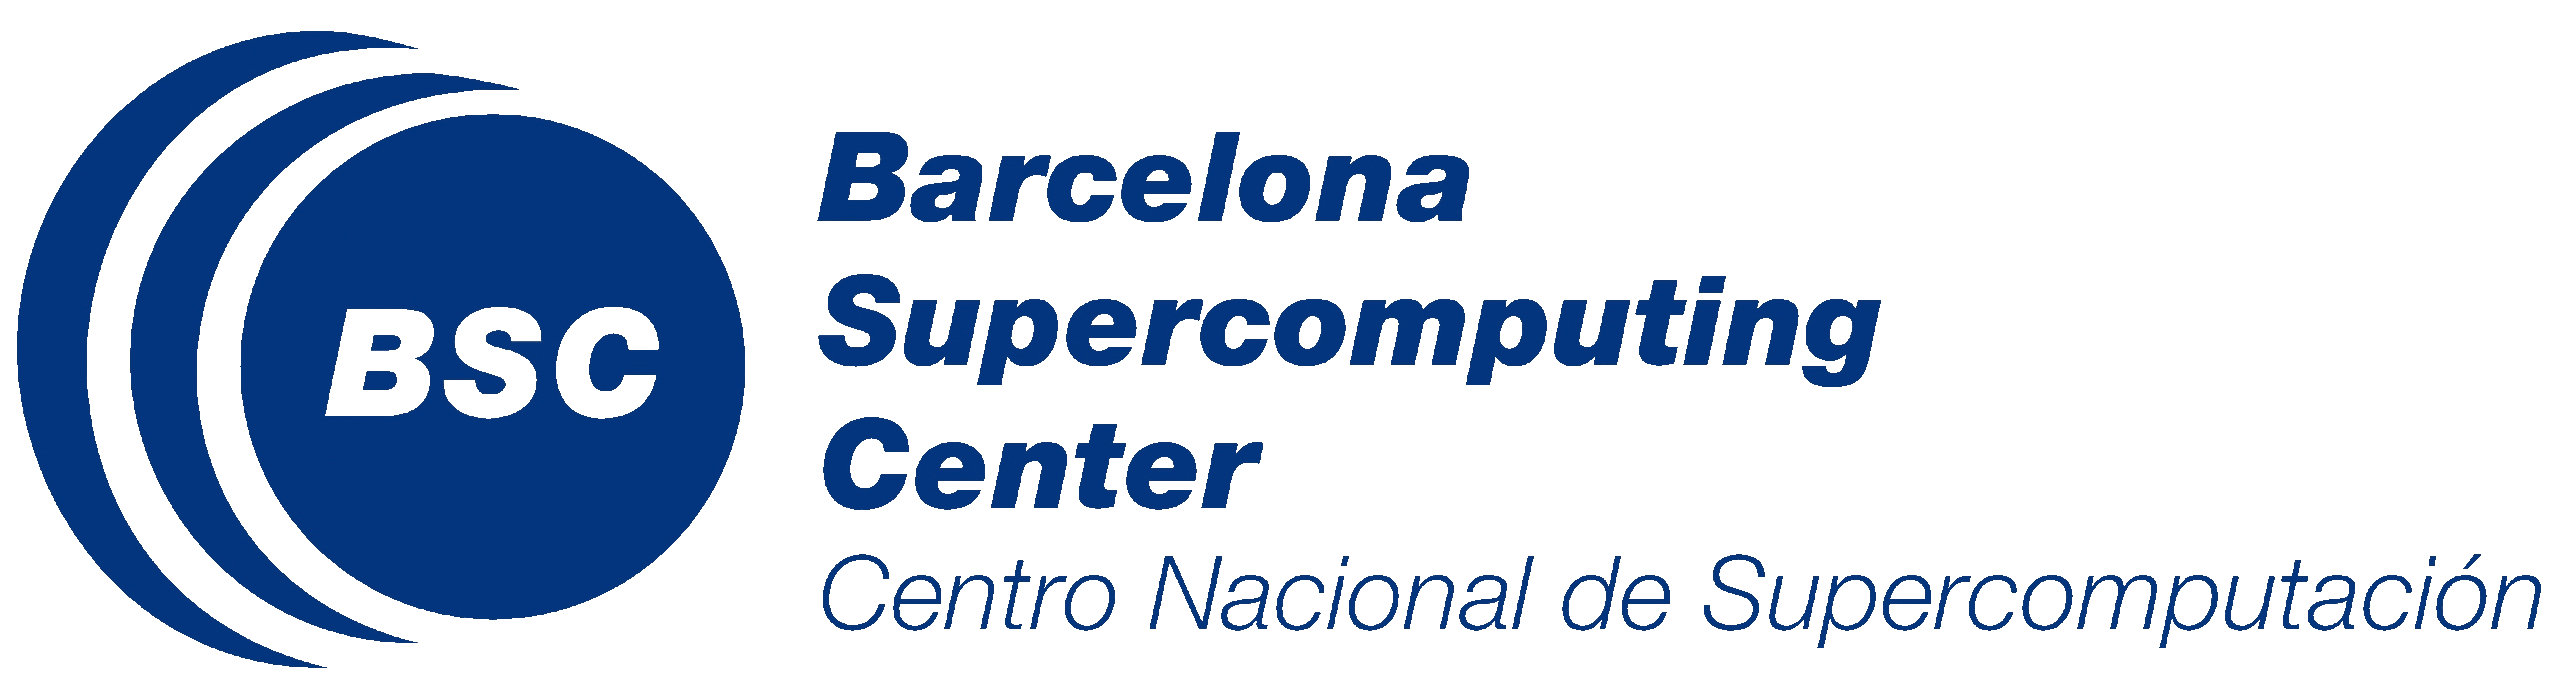 Letters BSC inside a blue circle with partial crescents of other circles behind it. To the right is the text 'Barcelona Supercomputing Center Centro Nacional de Supercomputation'